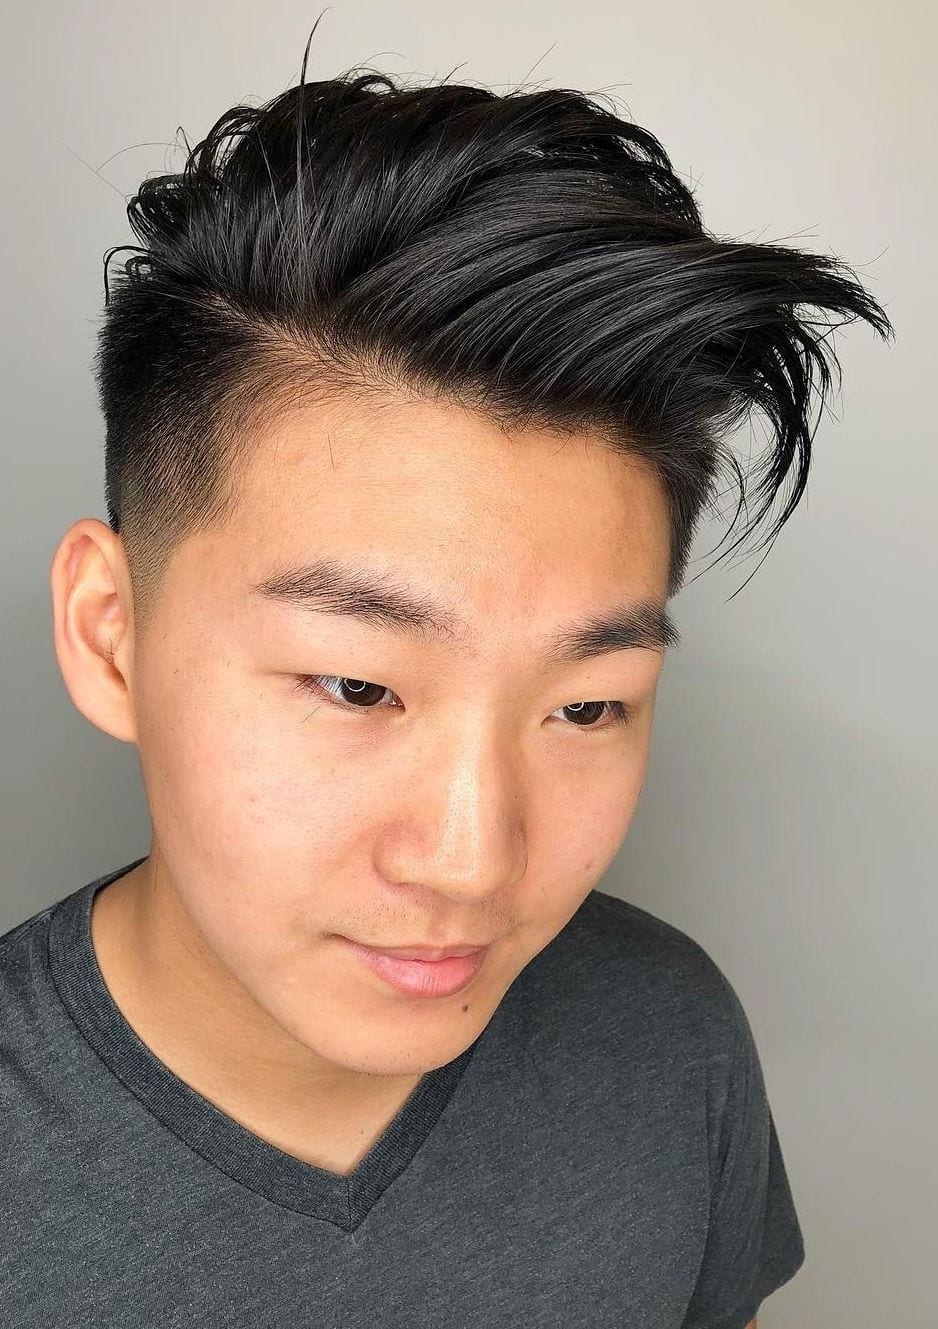 Top 30 Trendy Asian Men Hairstyles 2019 within Asian Boy Long Hairstyle